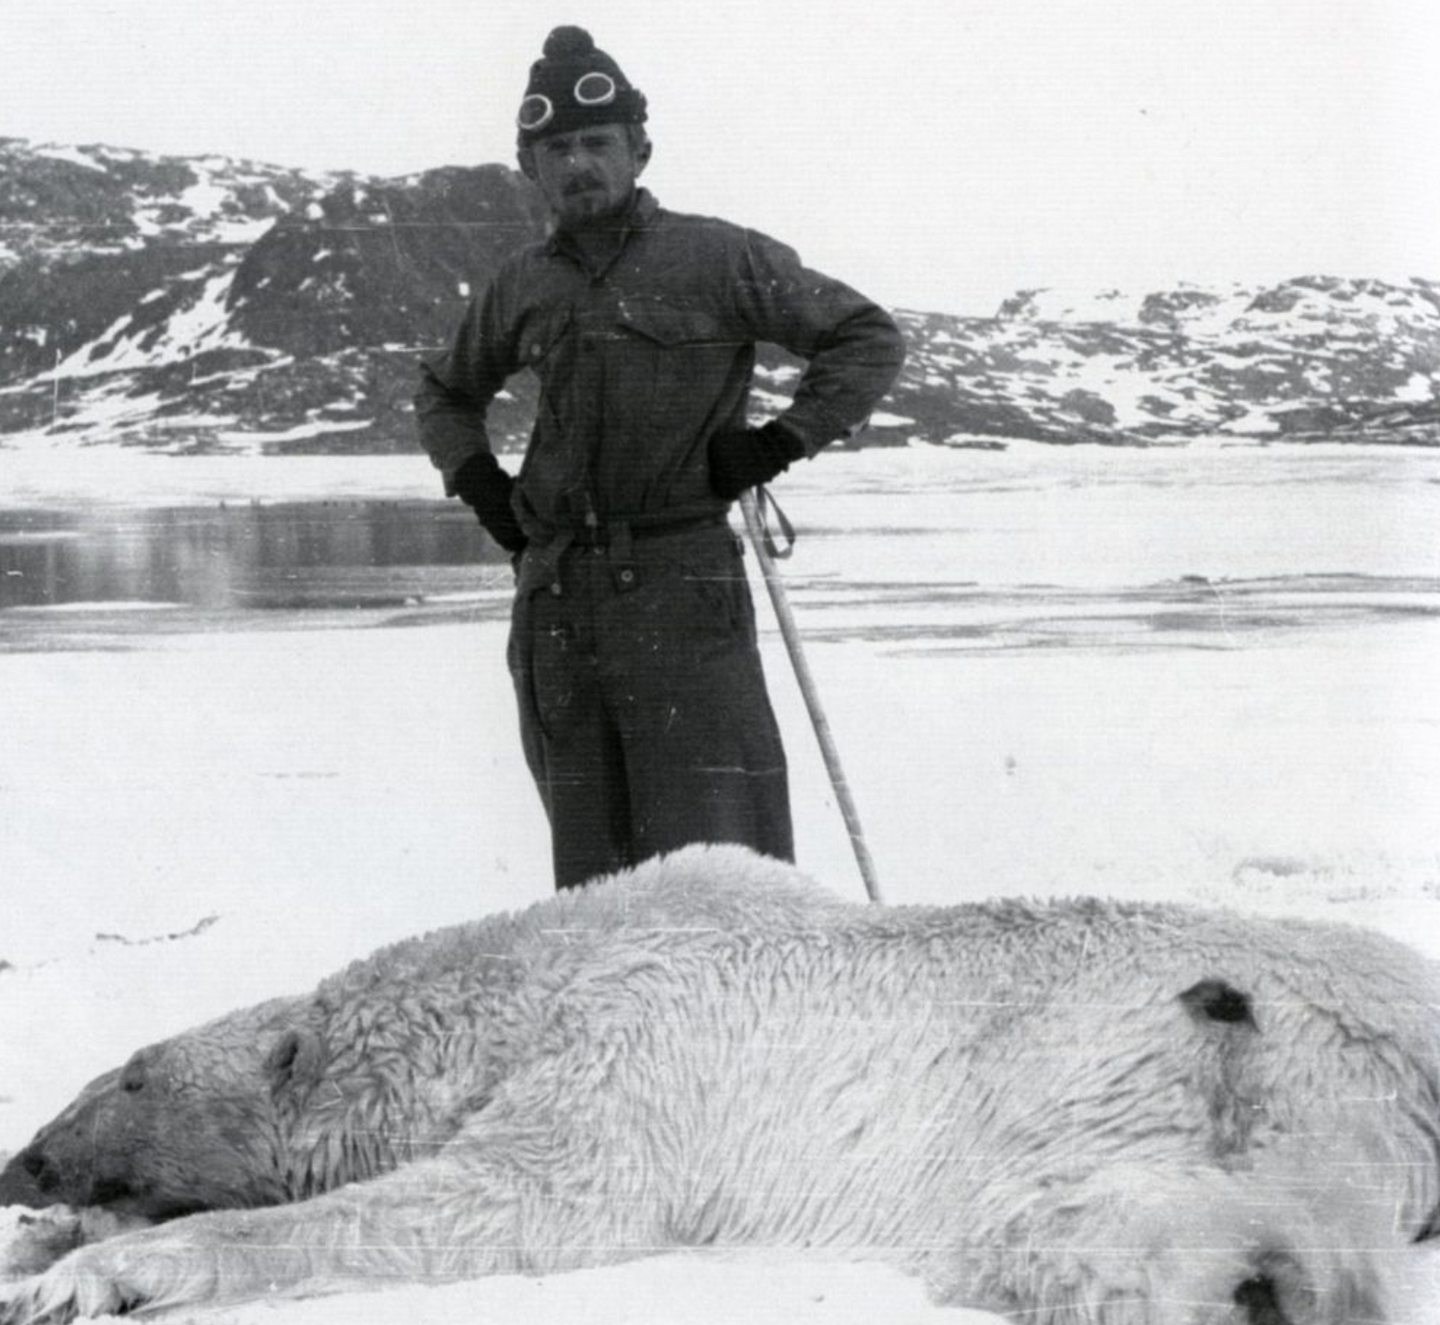 A member of the weather station with a slain polar bear. Photo: From the archive of Wilhelm Dege